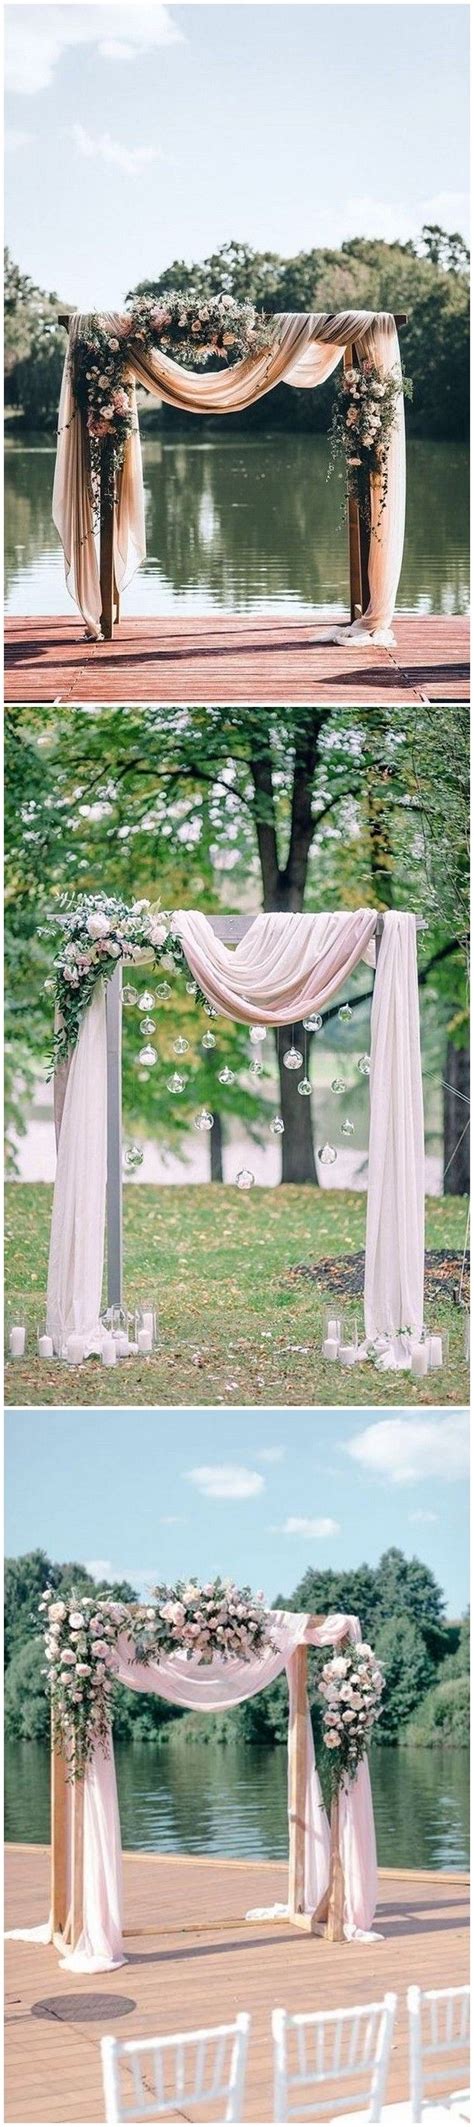 20 Wedding Arches With Drapery Fabric In 2020 Wedding